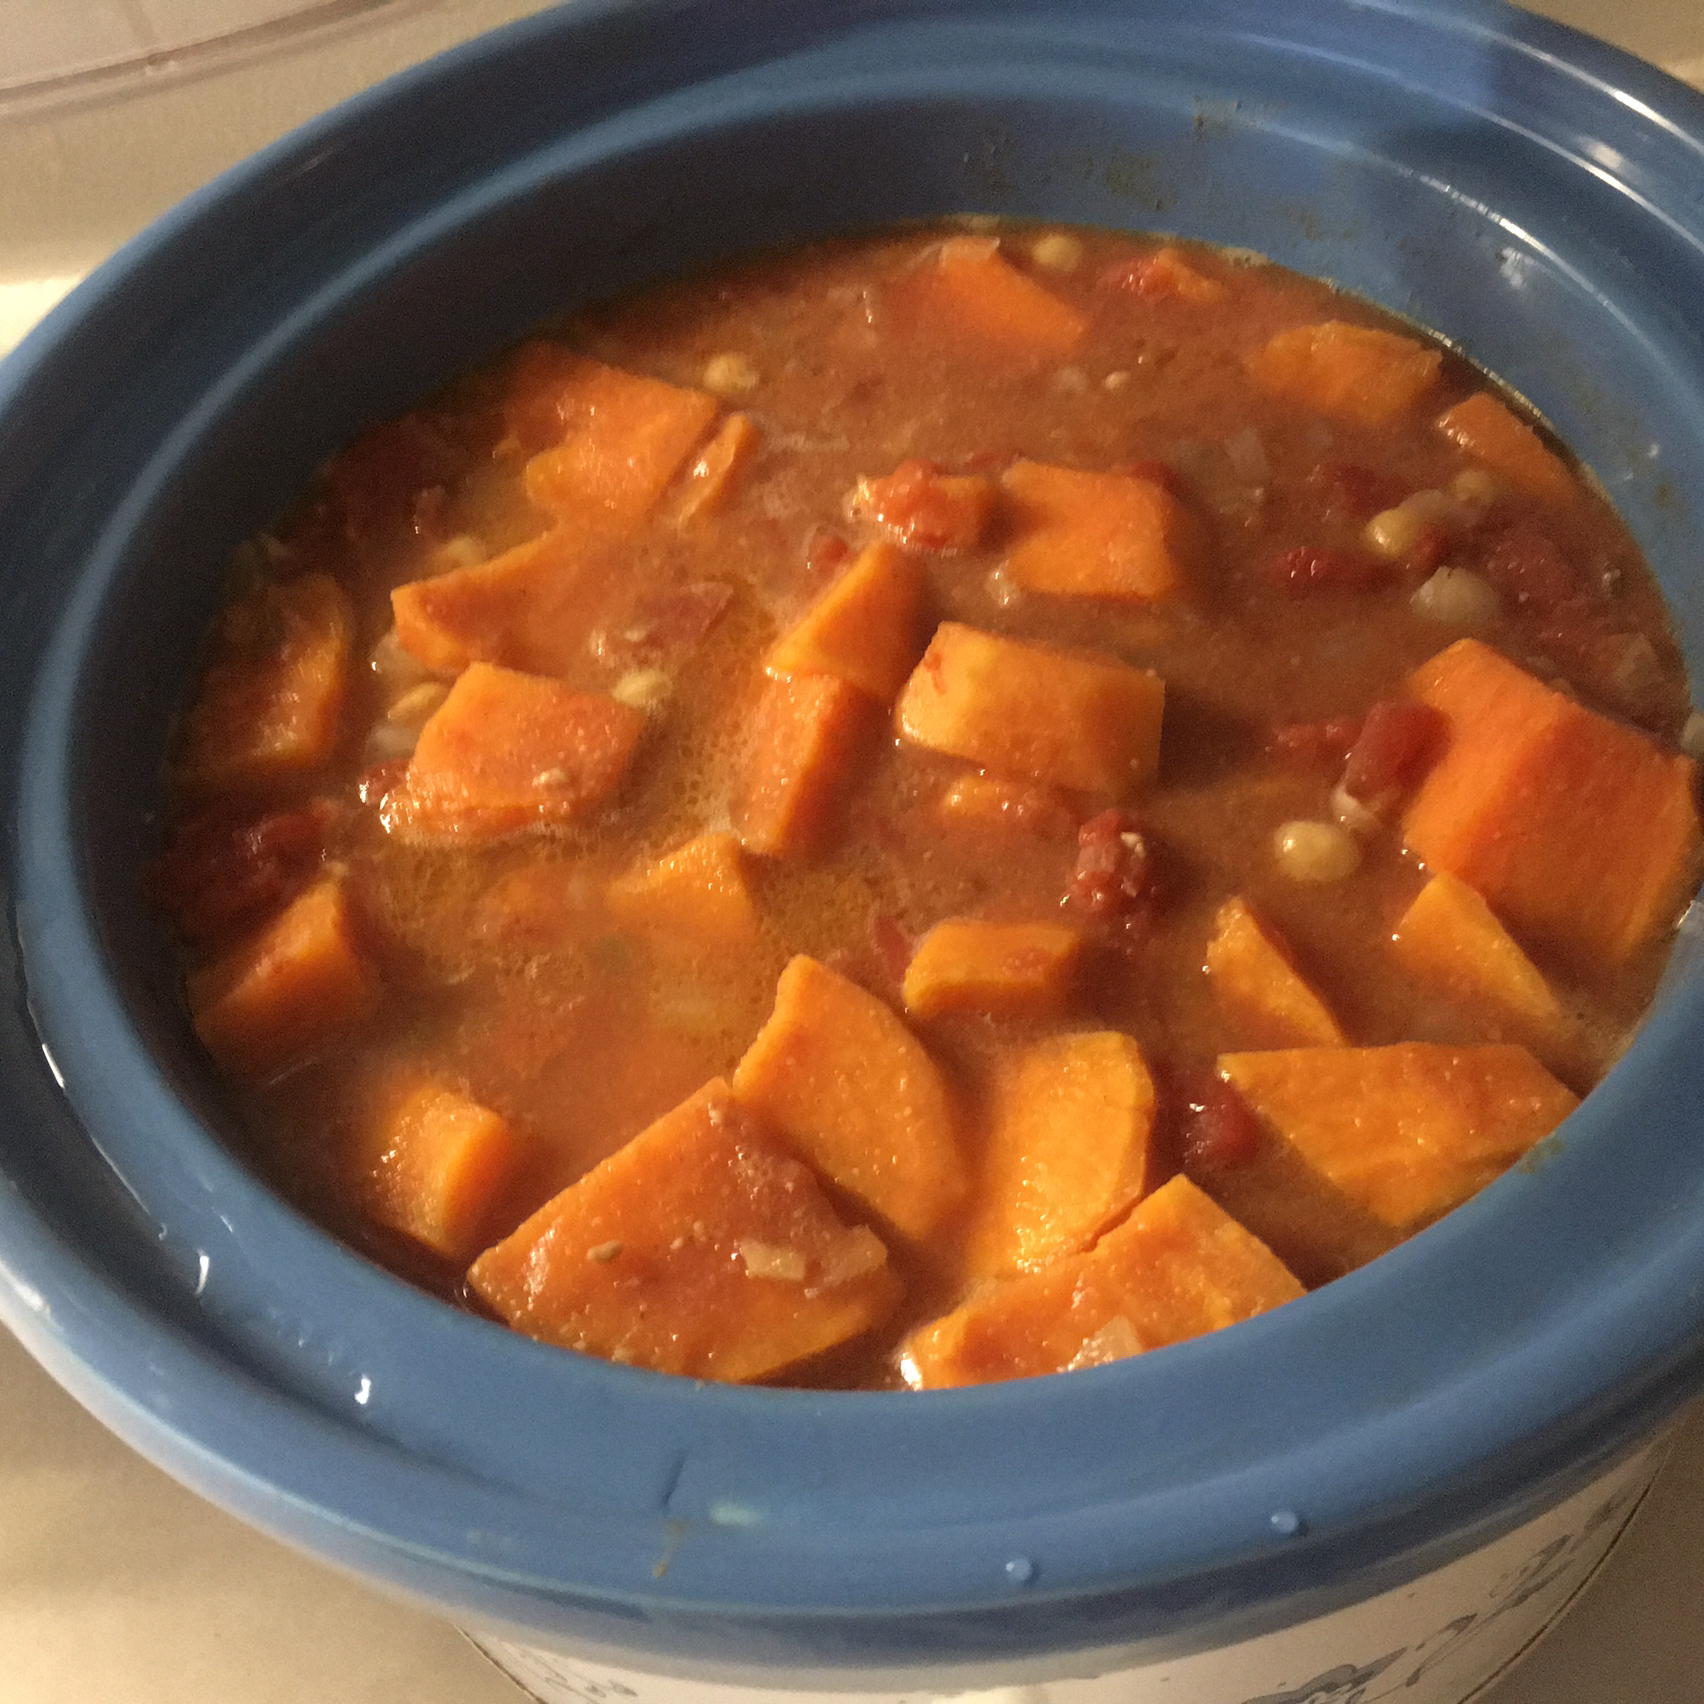 <p>This slow-cooked sweet potato and chickpea stew with green beans, fresh jalapeno peppers, and a little peanut butter is perfect for a hearty, healthy weeknight dinner. "This wonderfully slightly spicy stew is true comfort food of the highest order," raves fluffy-not-fat. "Great with sauteed greens!"</p>
                          <p> </p>
                          